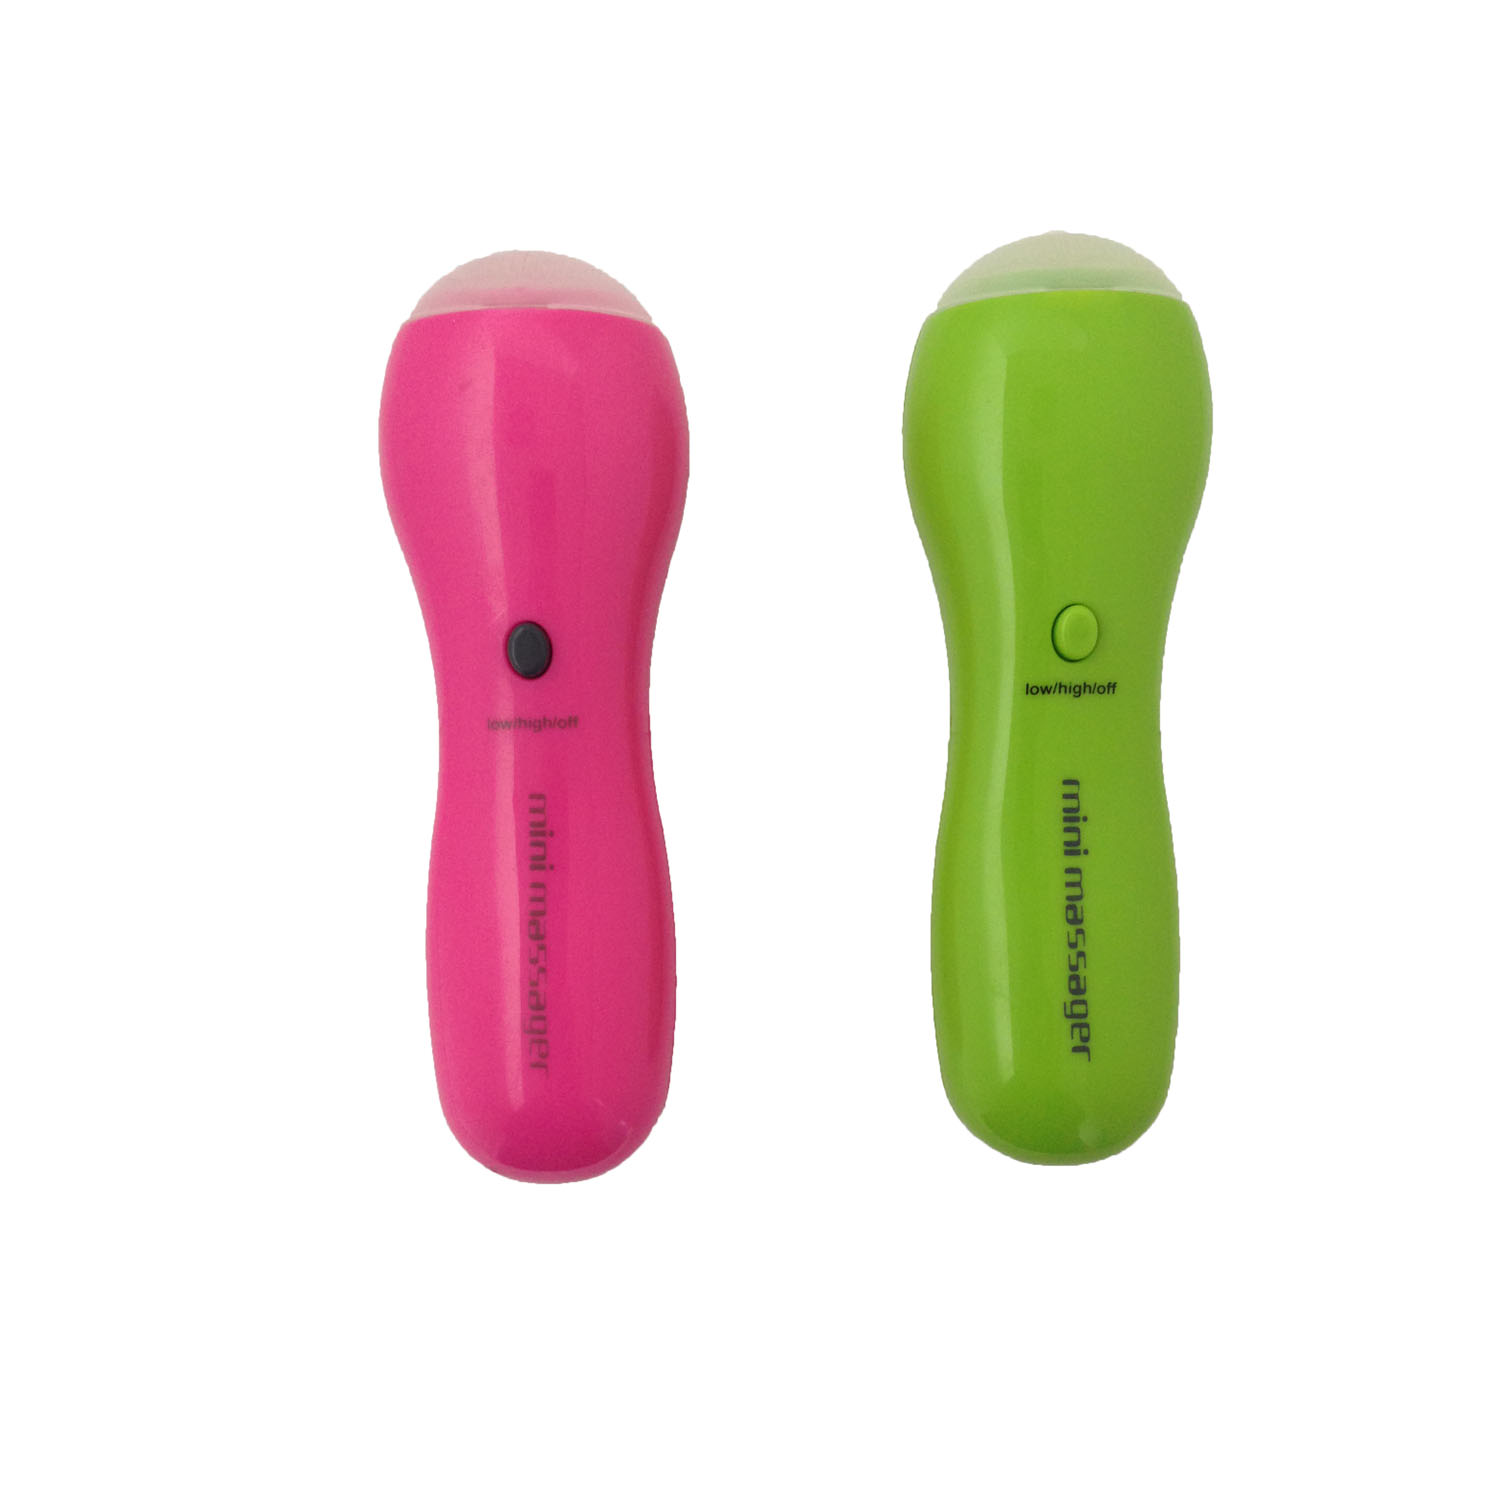 GL-AAA1411 Battery Operated Vibration Soothing Mini Massager